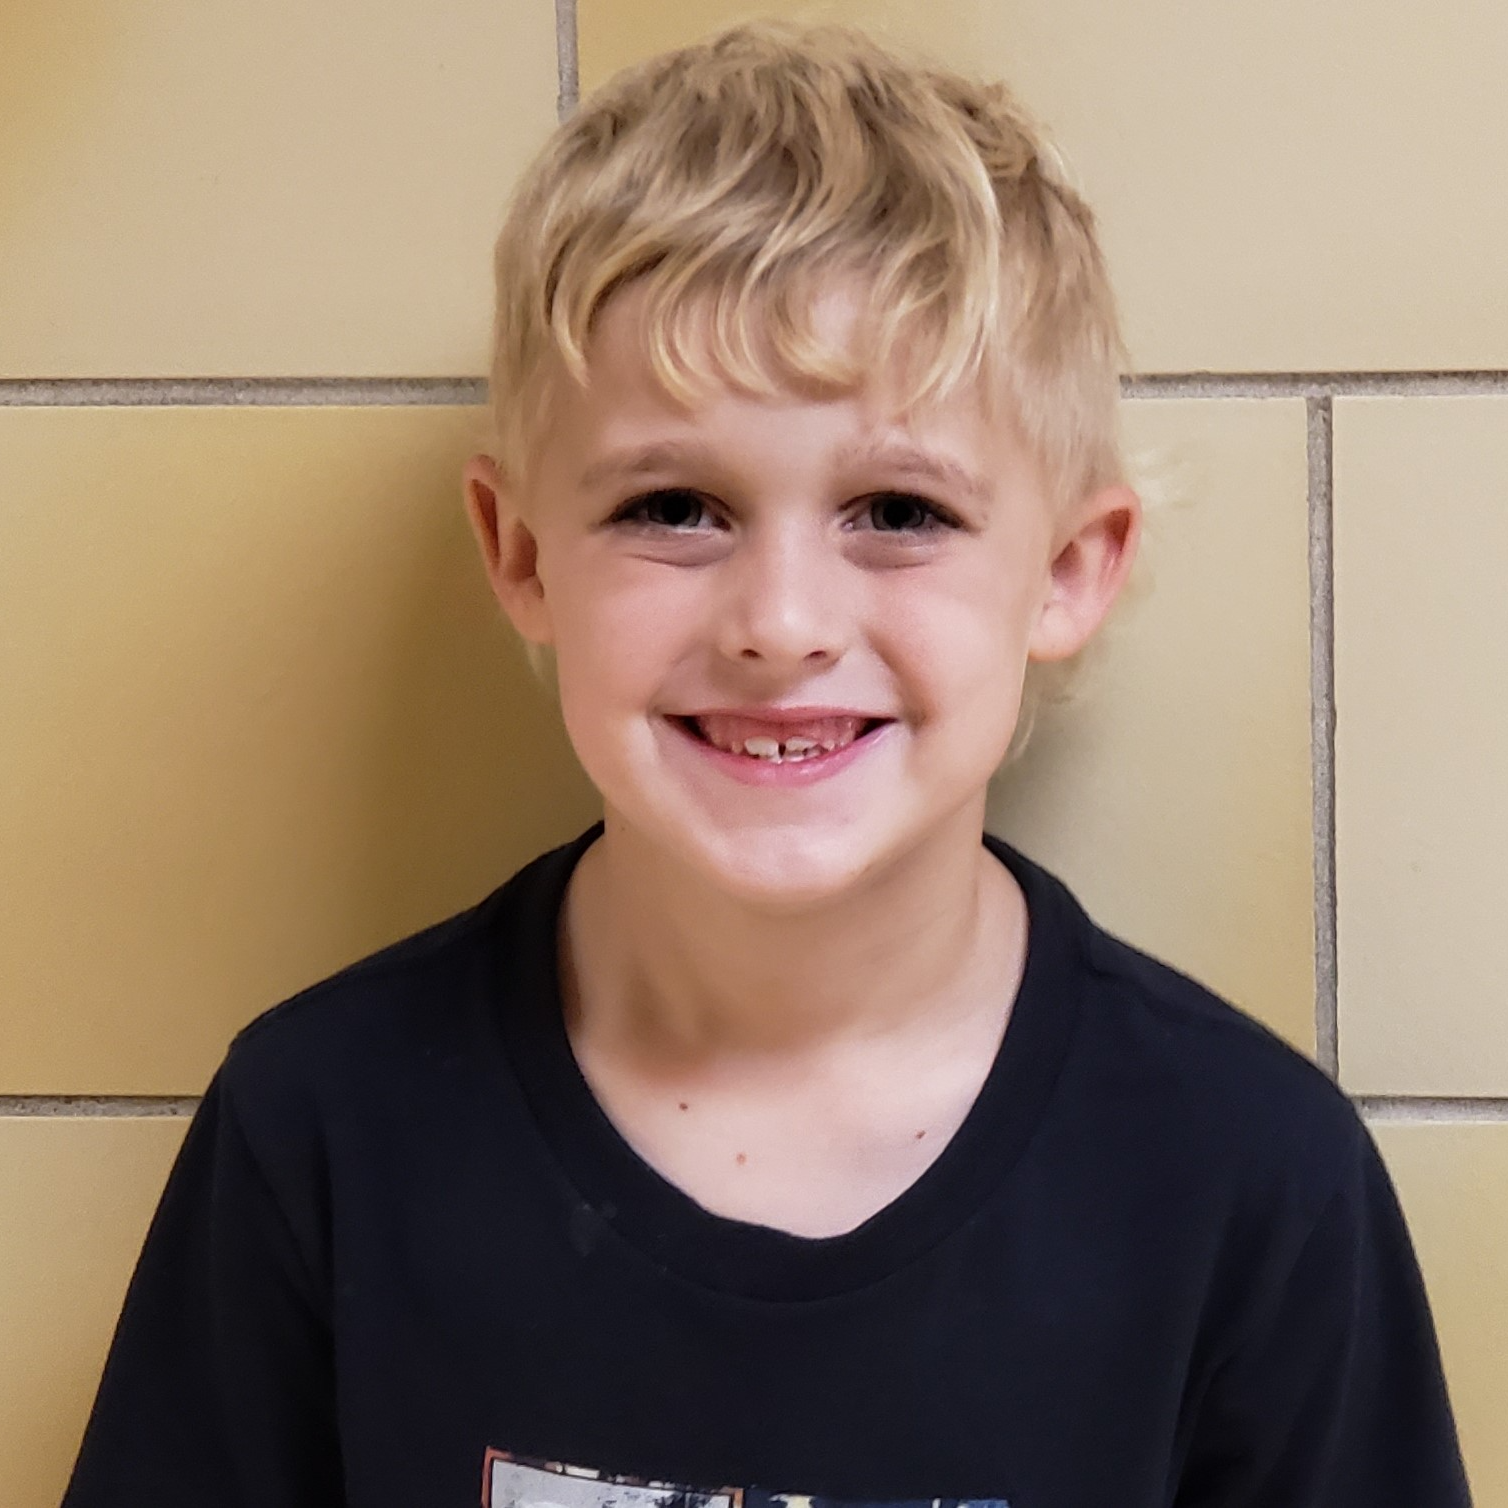 smiling young boy with blonde hair wearing a black t-shirt